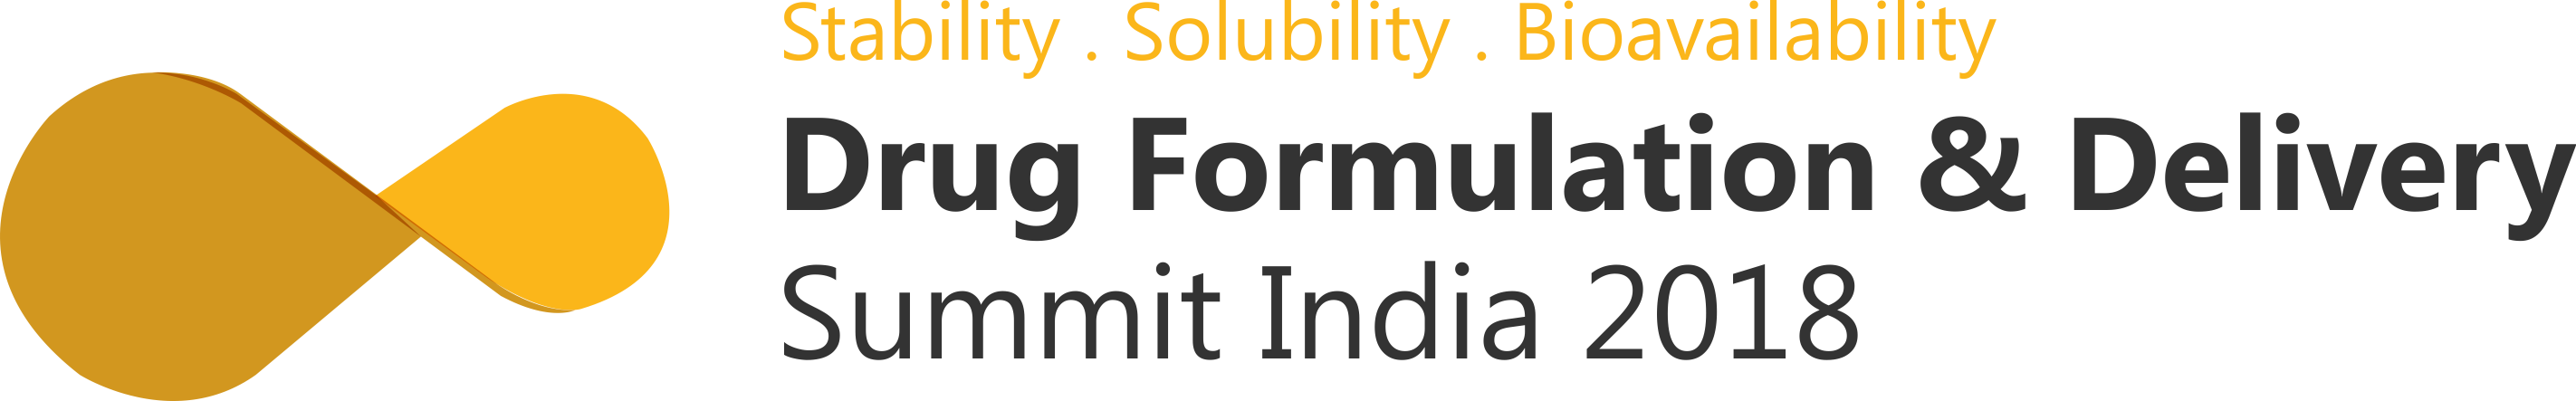 Photos of Drug Formulation & Delivery Summit India 2018